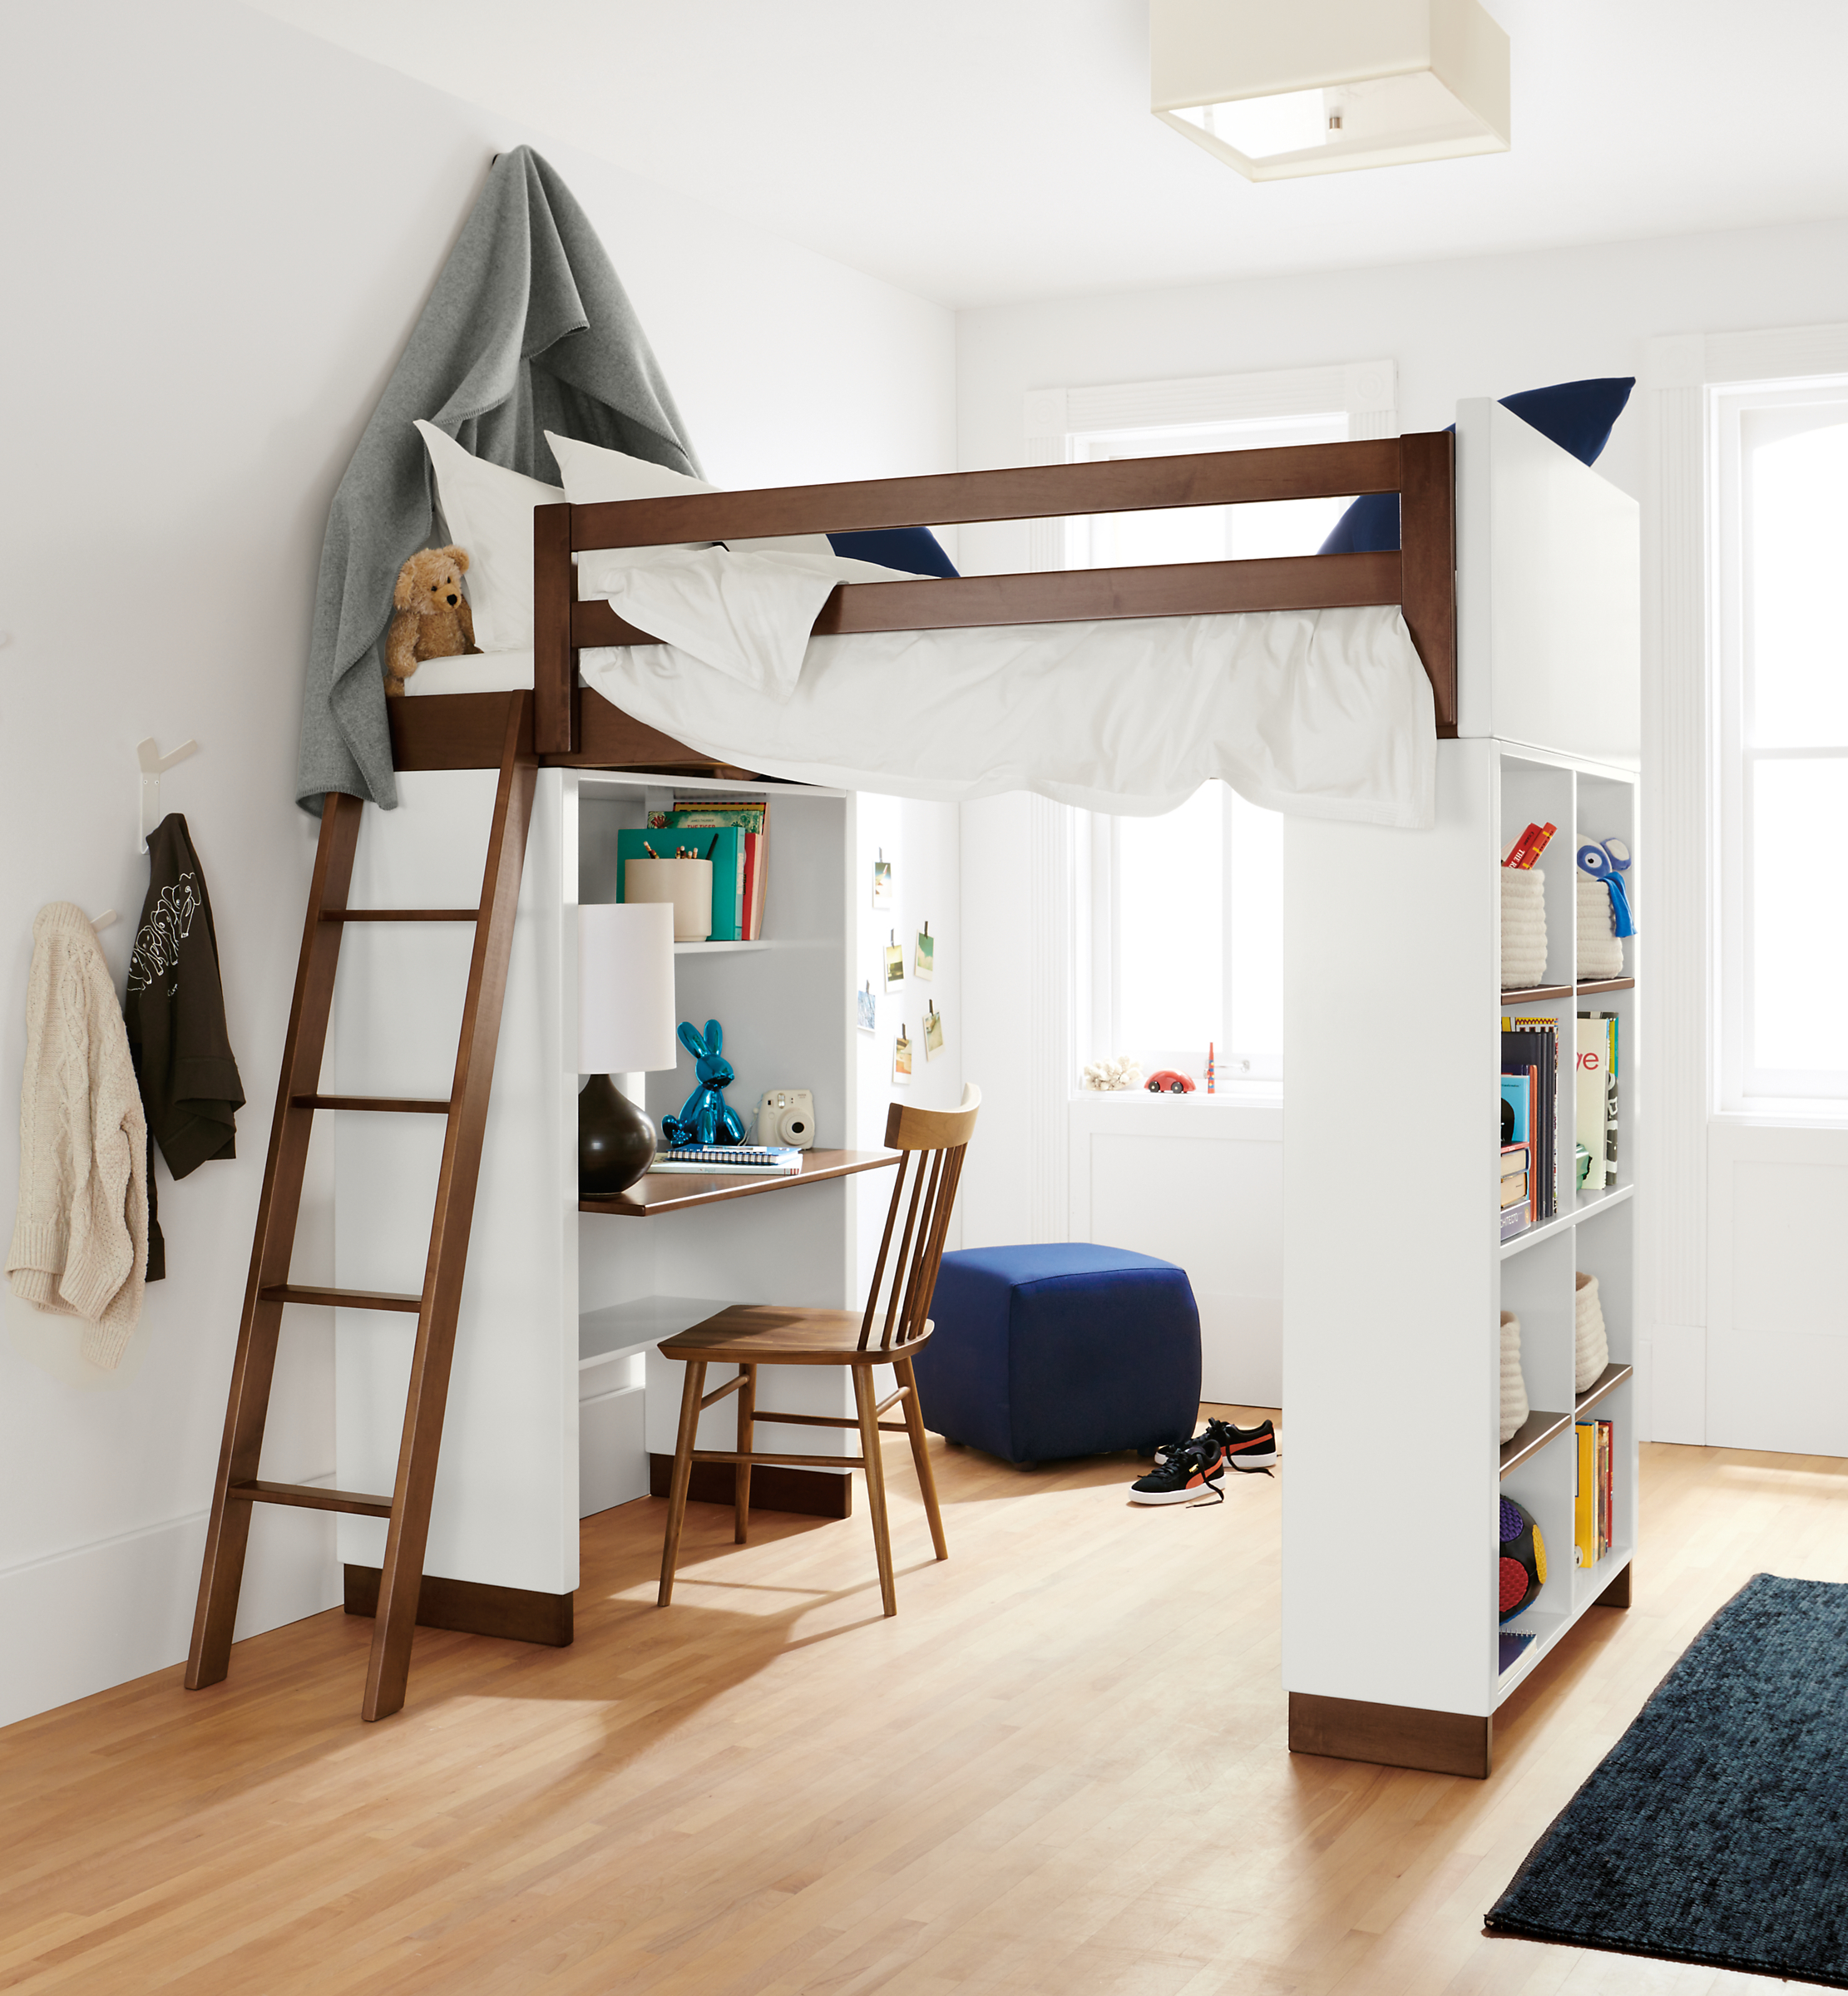 Detail of Moda loft bed with desk and bookcase.